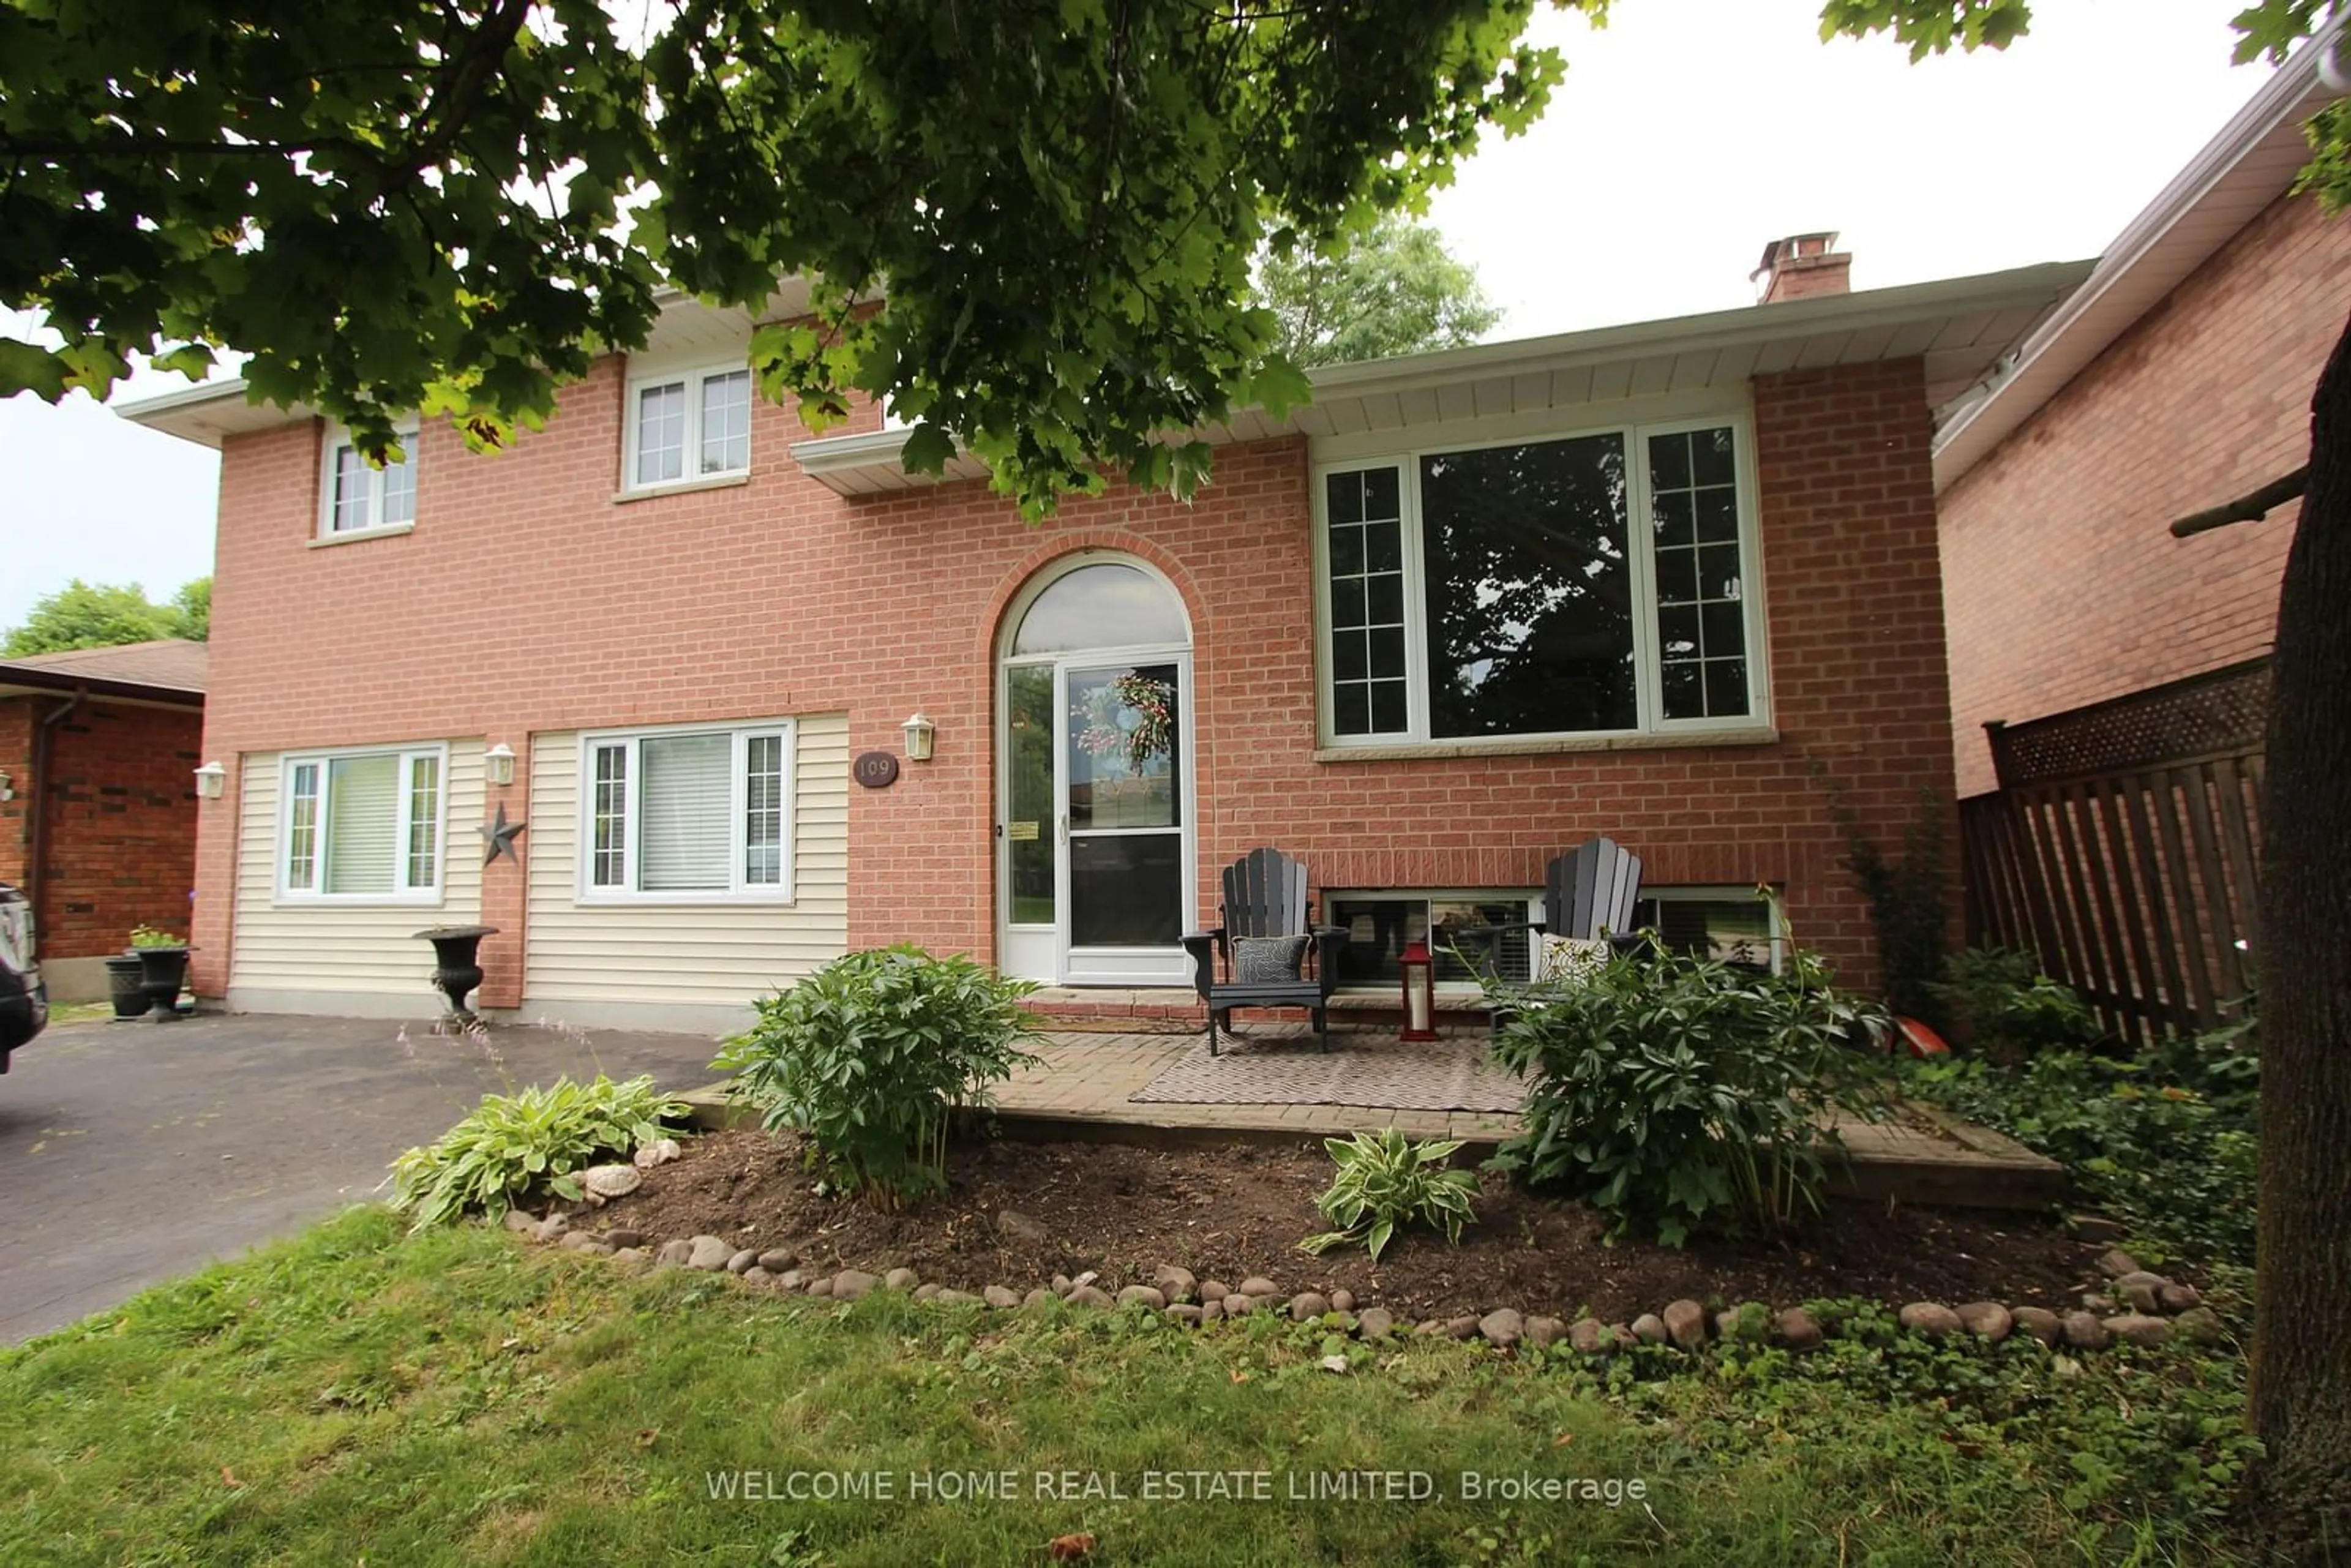 Home with brick exterior material for 109 Cunningham Dr, New Tecumseth Ontario L9R 1C6